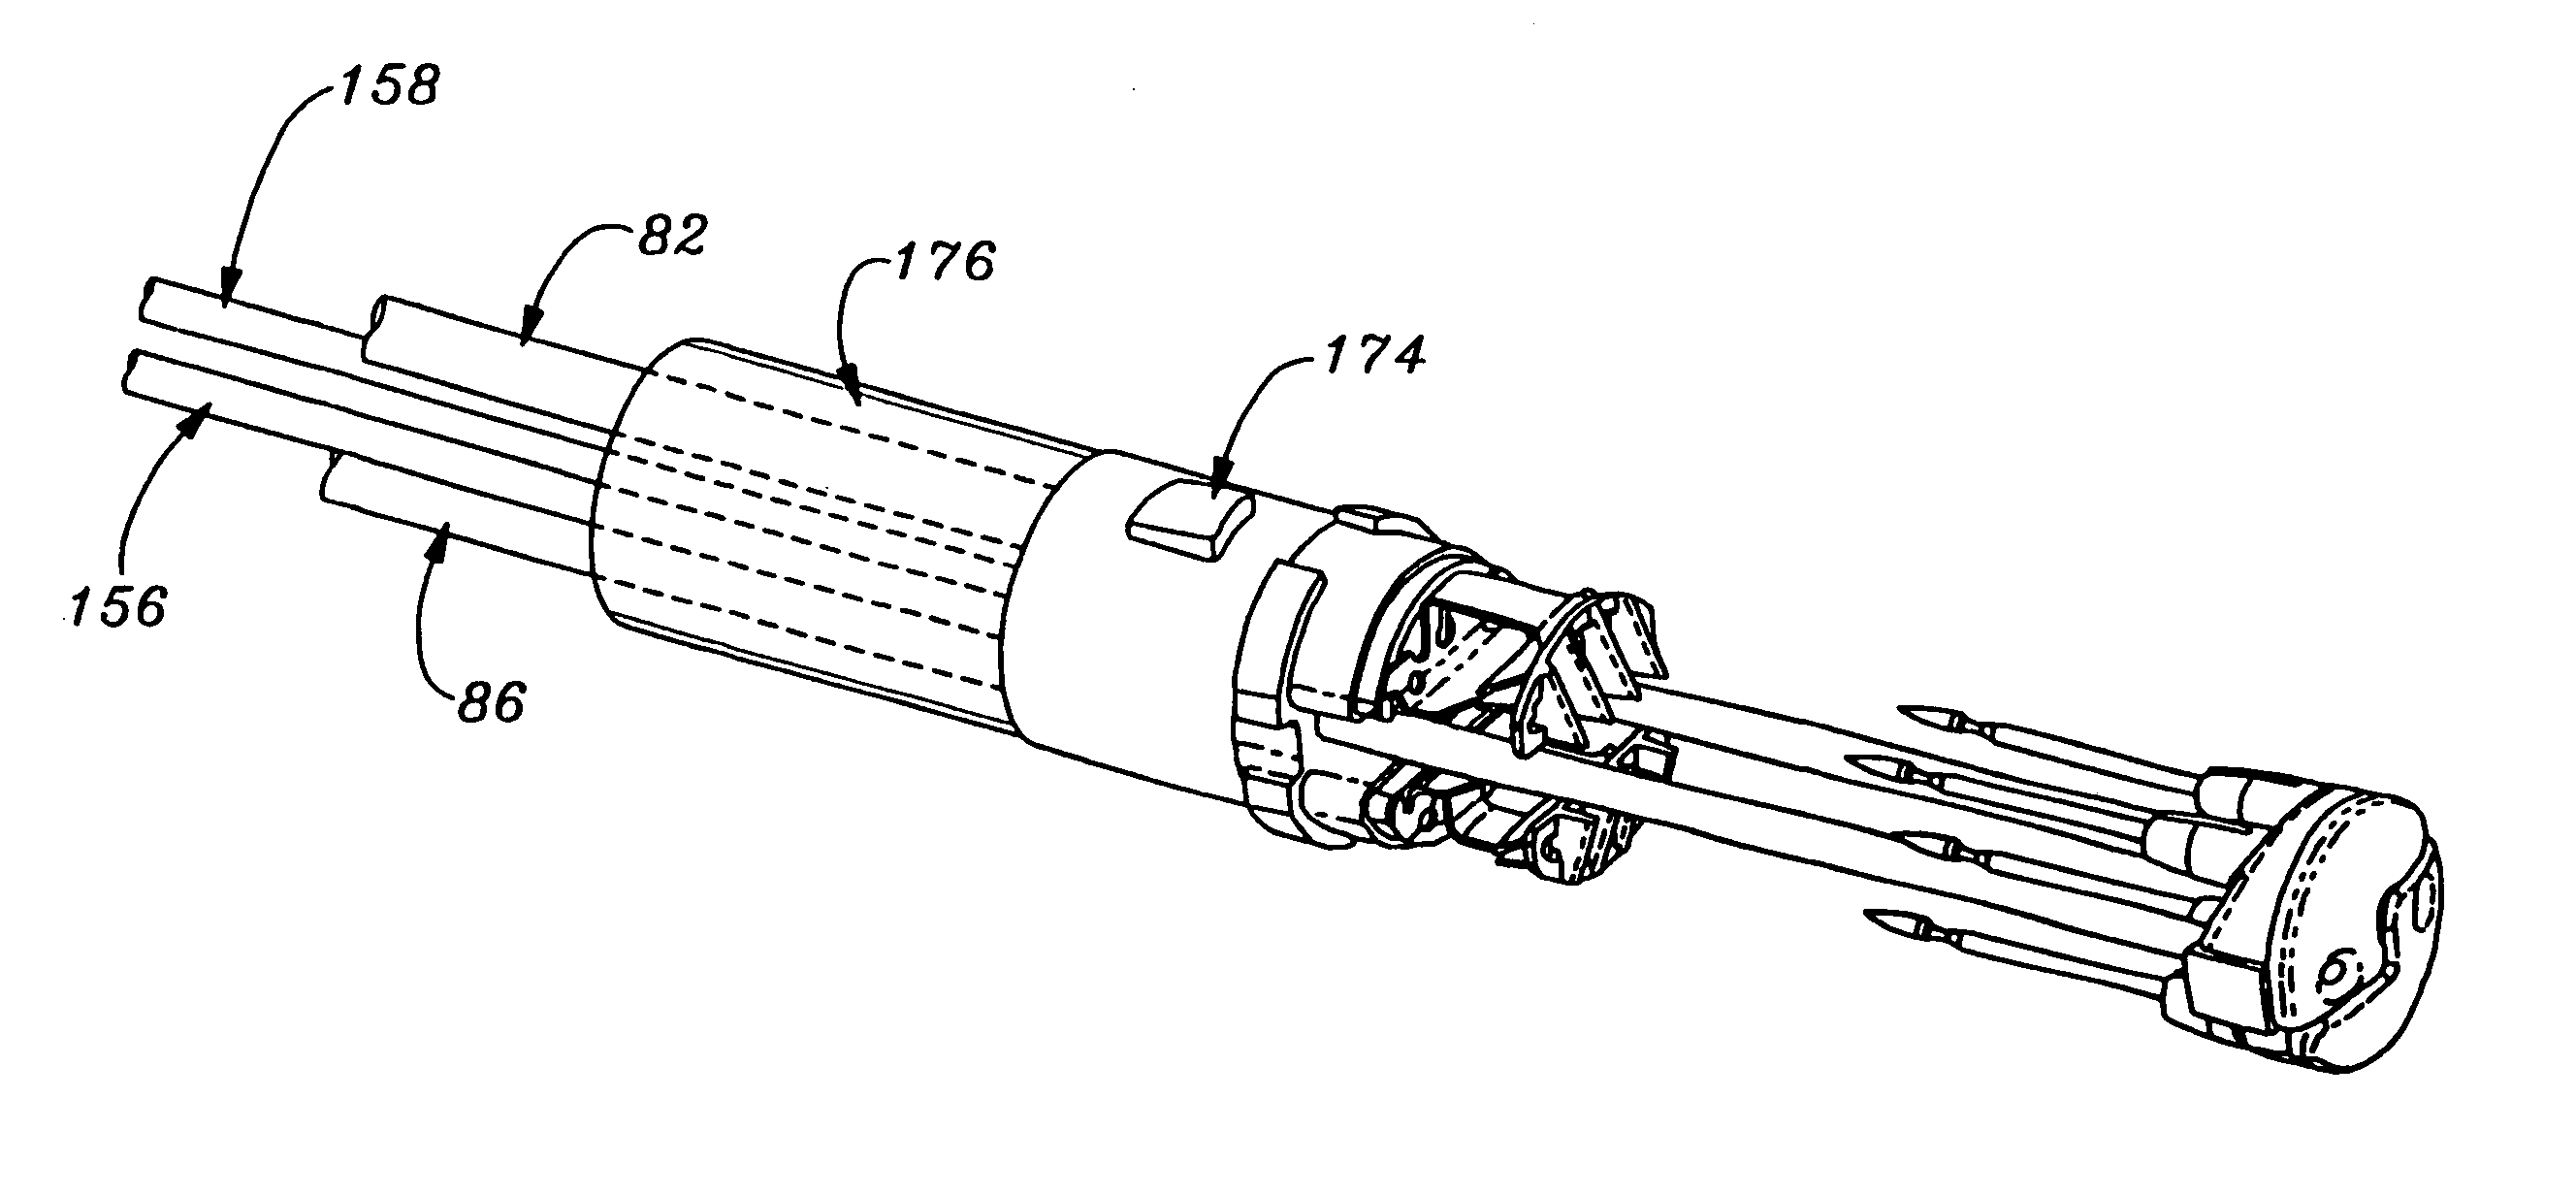 Sequential heart valve leaflet repair device and method of use